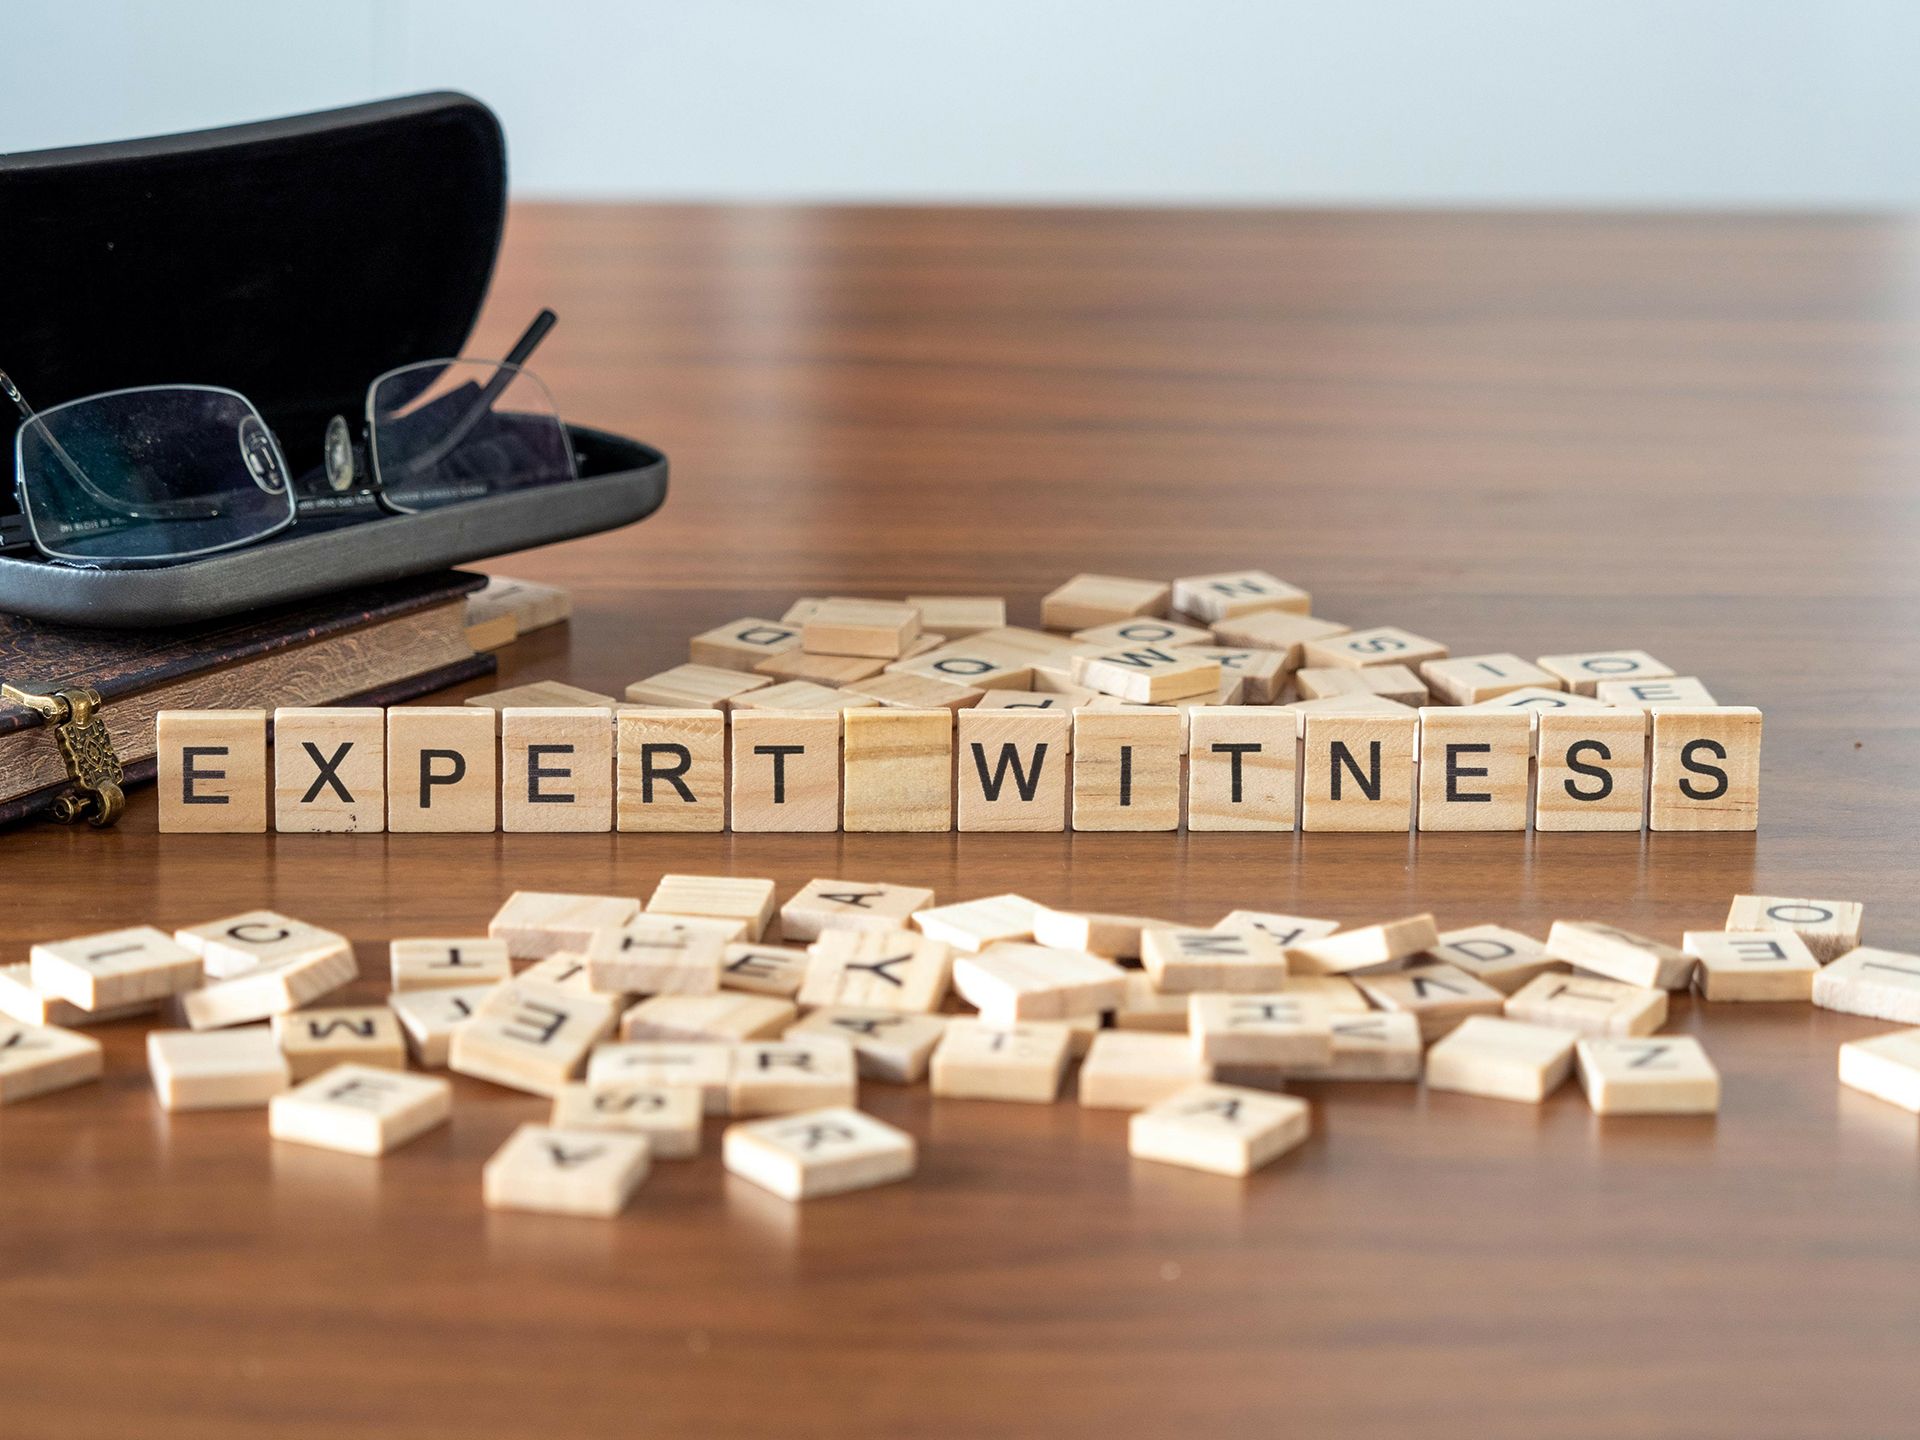 How Expert Witnesses are Selected